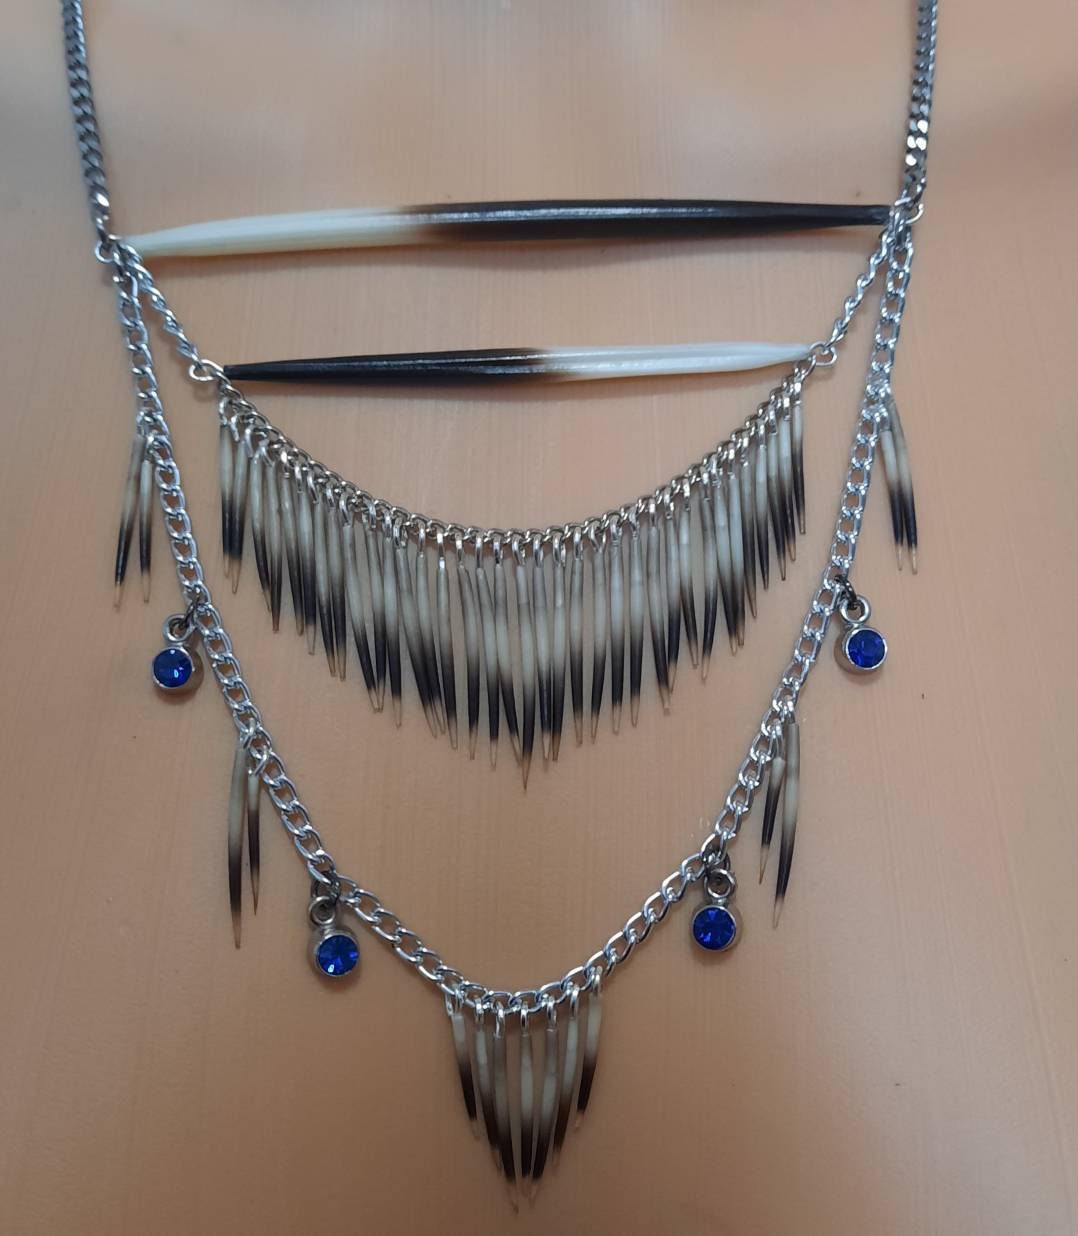 Porcupine Quill Chevron Necklace, Quill Necklace, Breastplate Porcupine  Necklace, Quill Jewelry, Rare Delicate Earthy Southwestern Necklace - Etsy